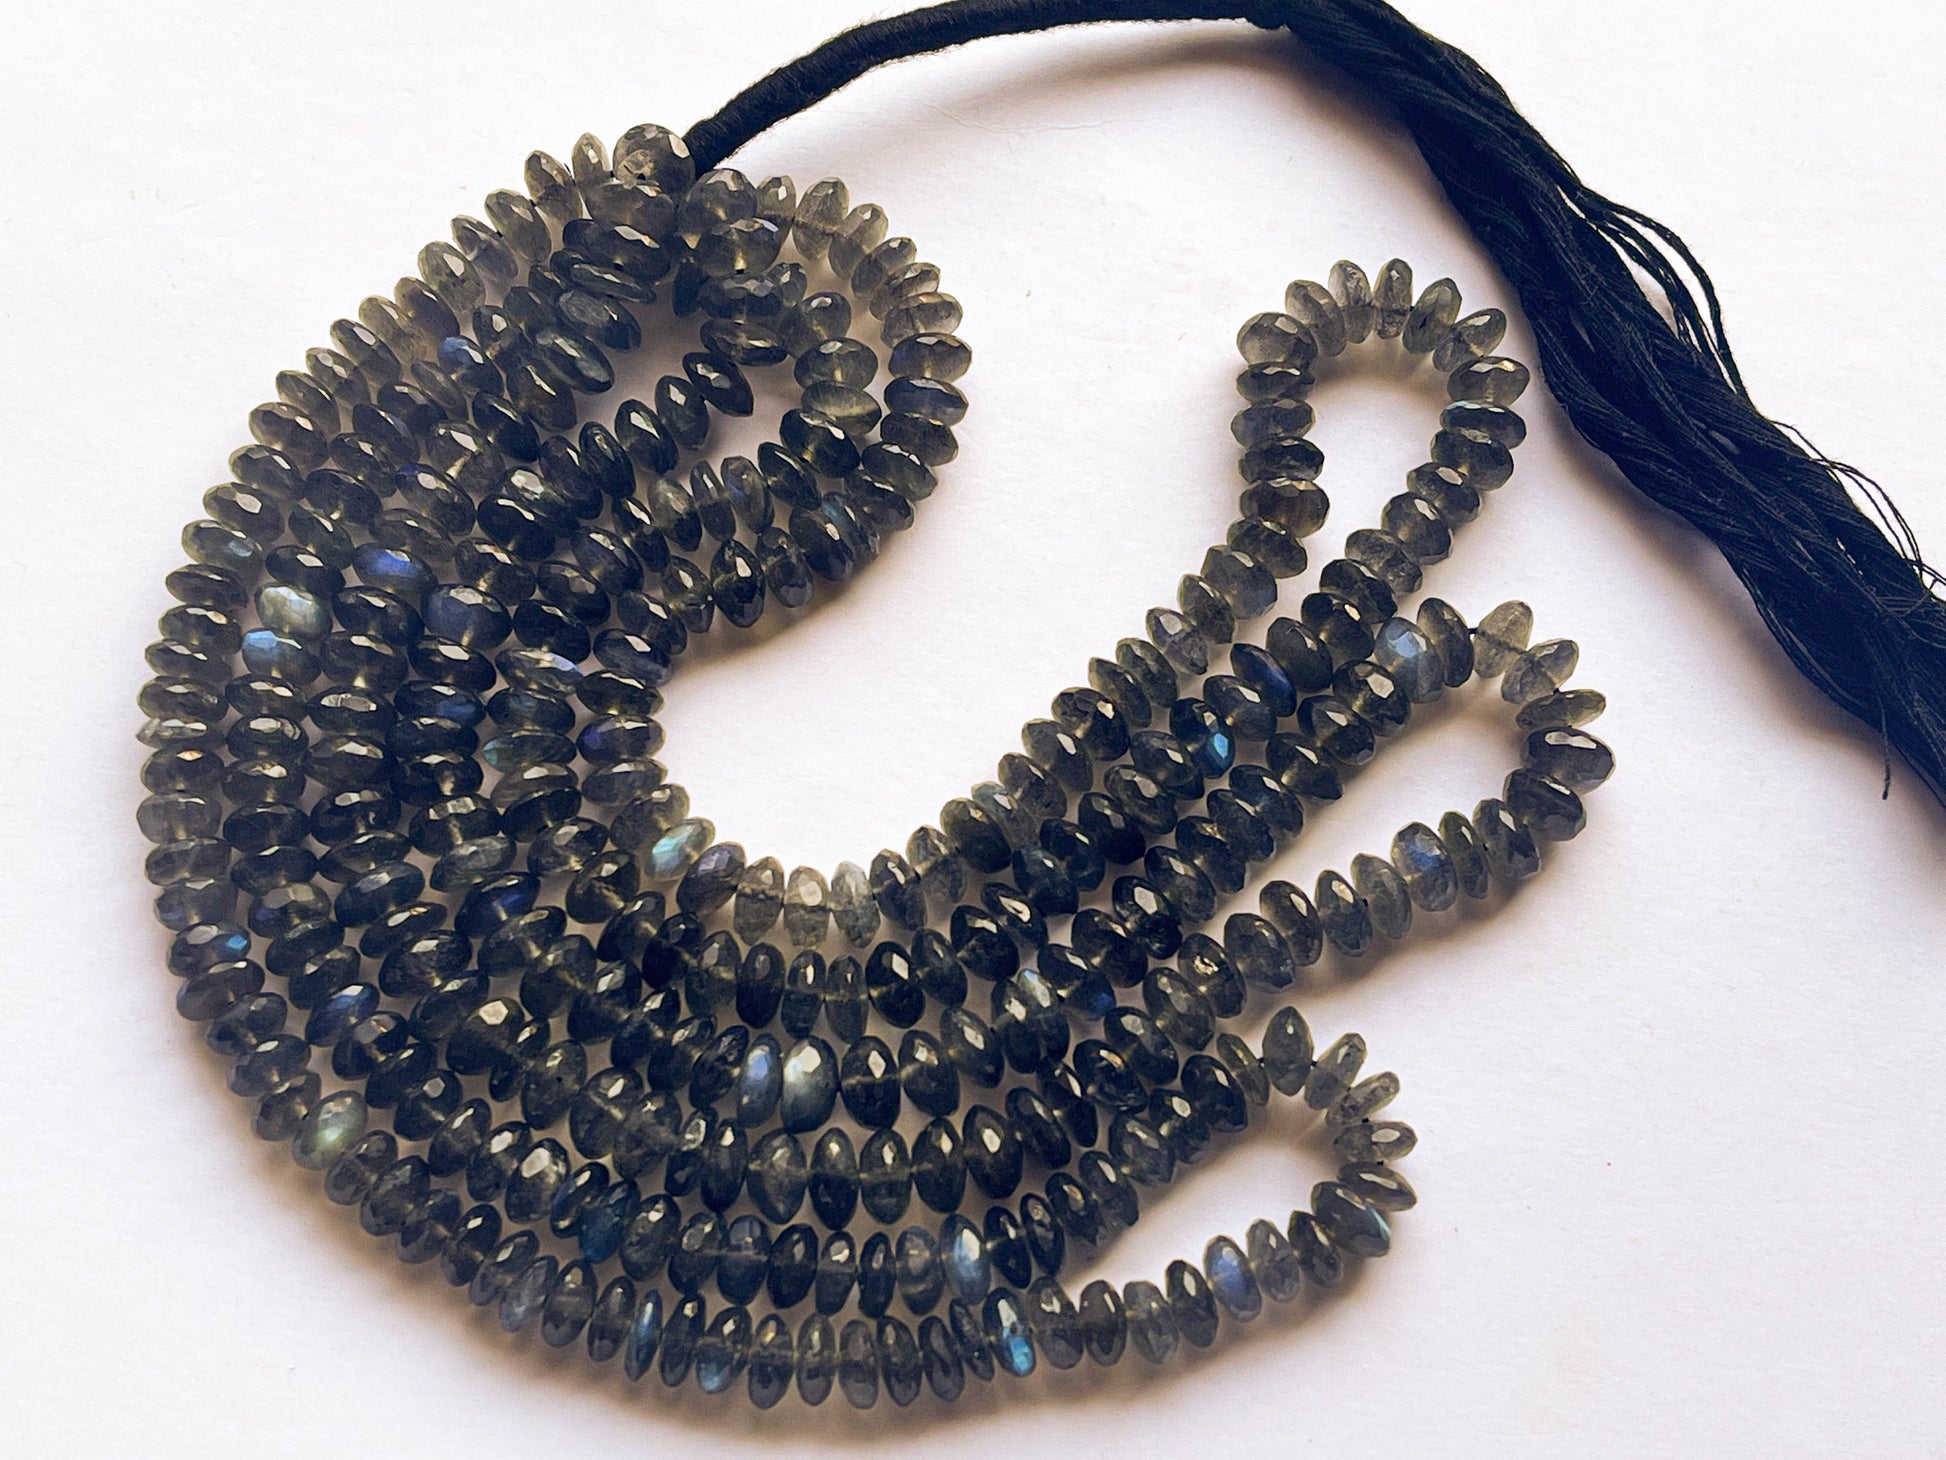 Labradorite Micro Faceted German Cut Rondelle Beads Beadsforyourjewelry